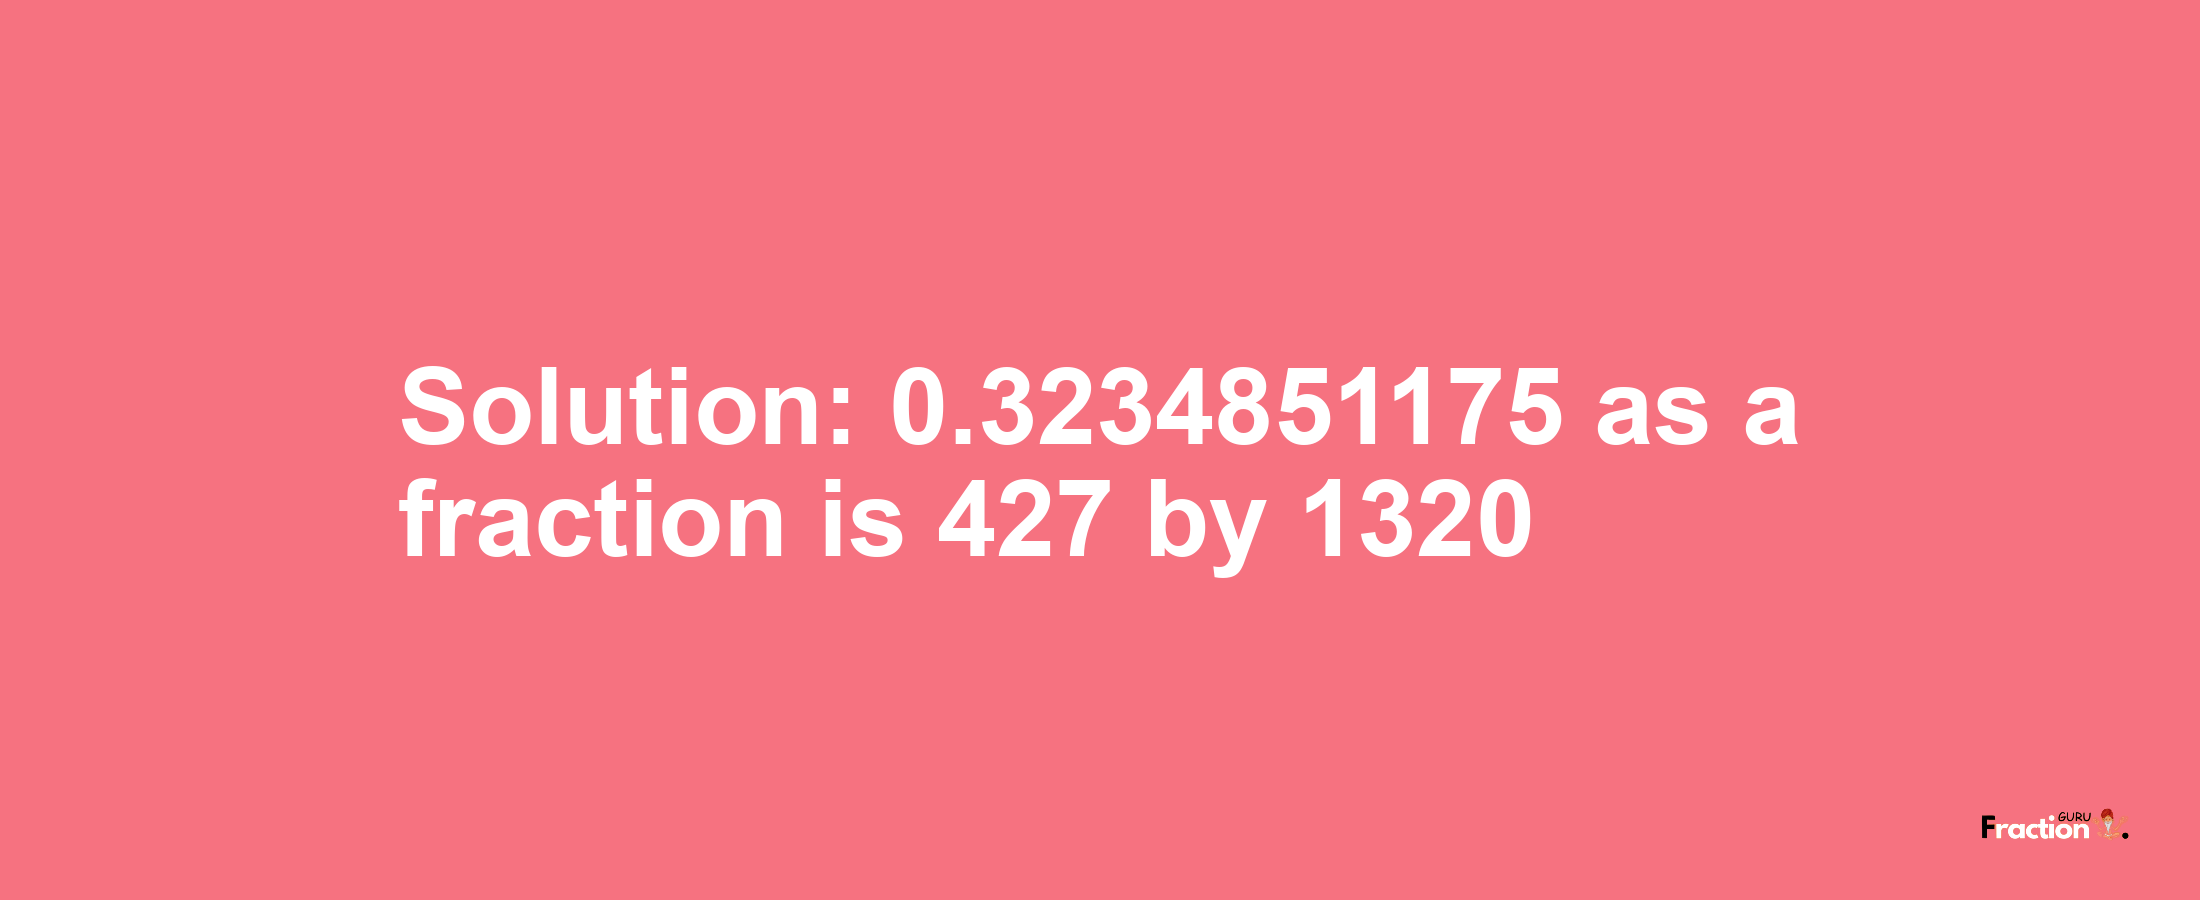 Solution:0.3234851175 as a fraction is 427/1320